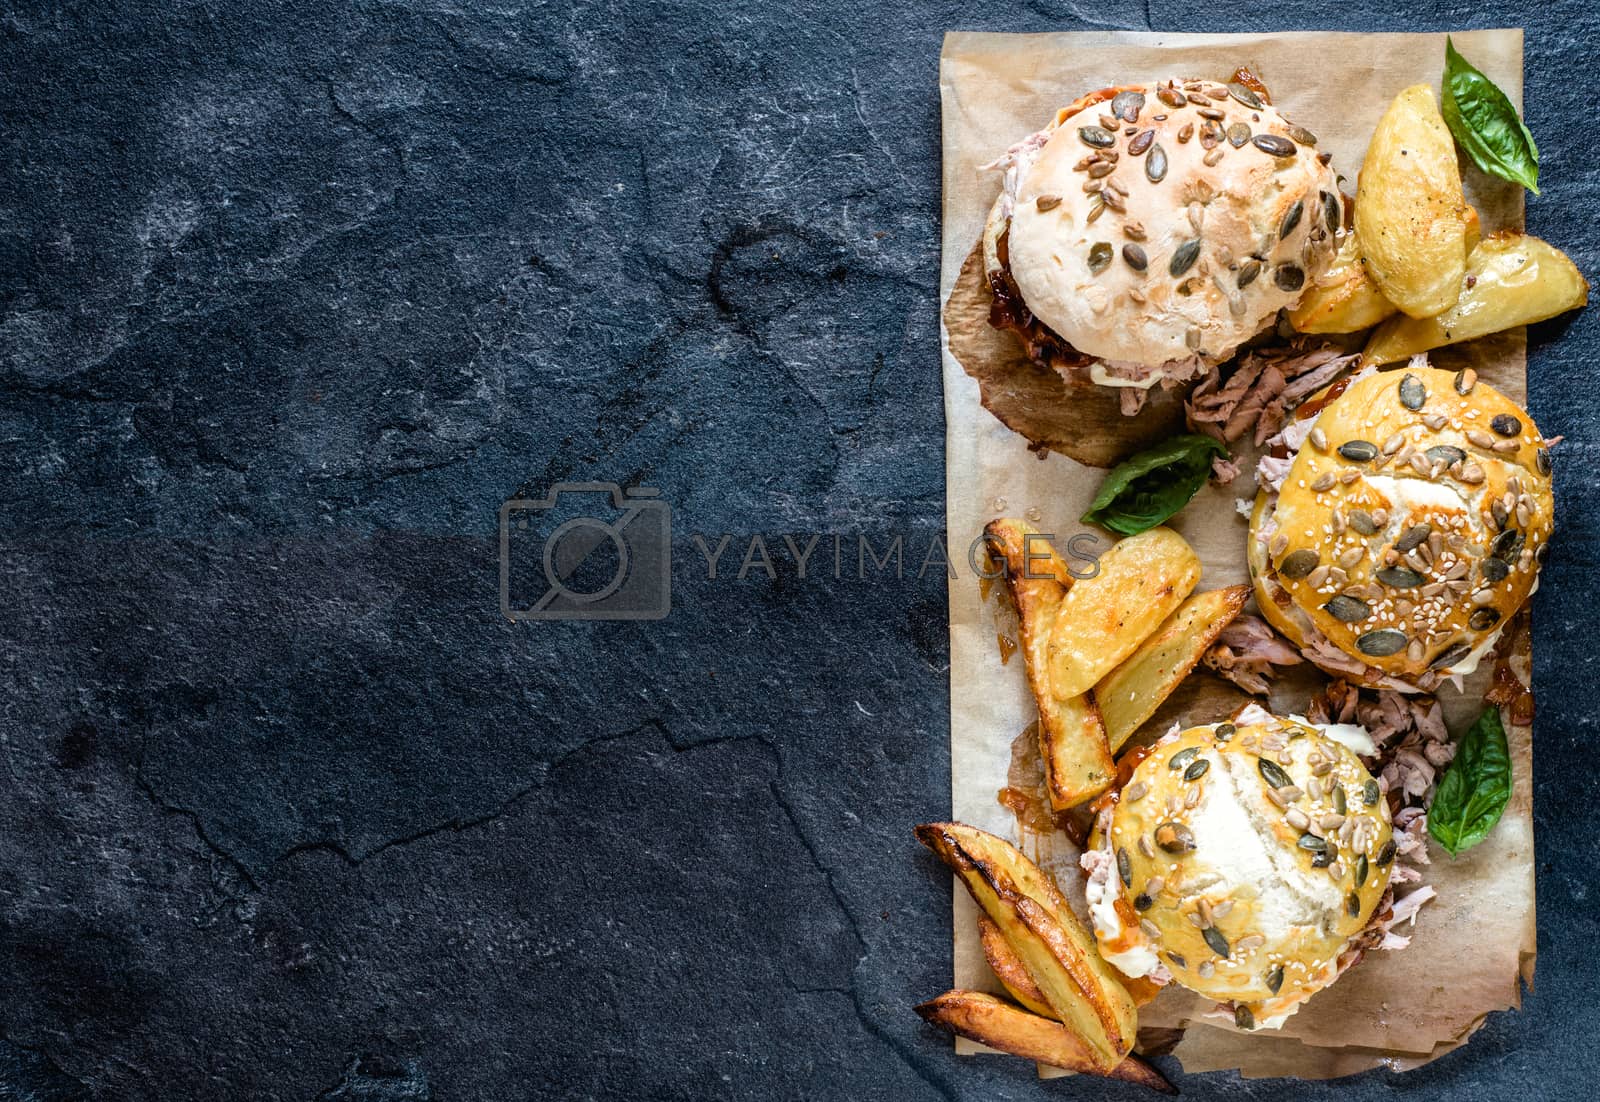 Royalty free image of Beef burgers by badmanproduction